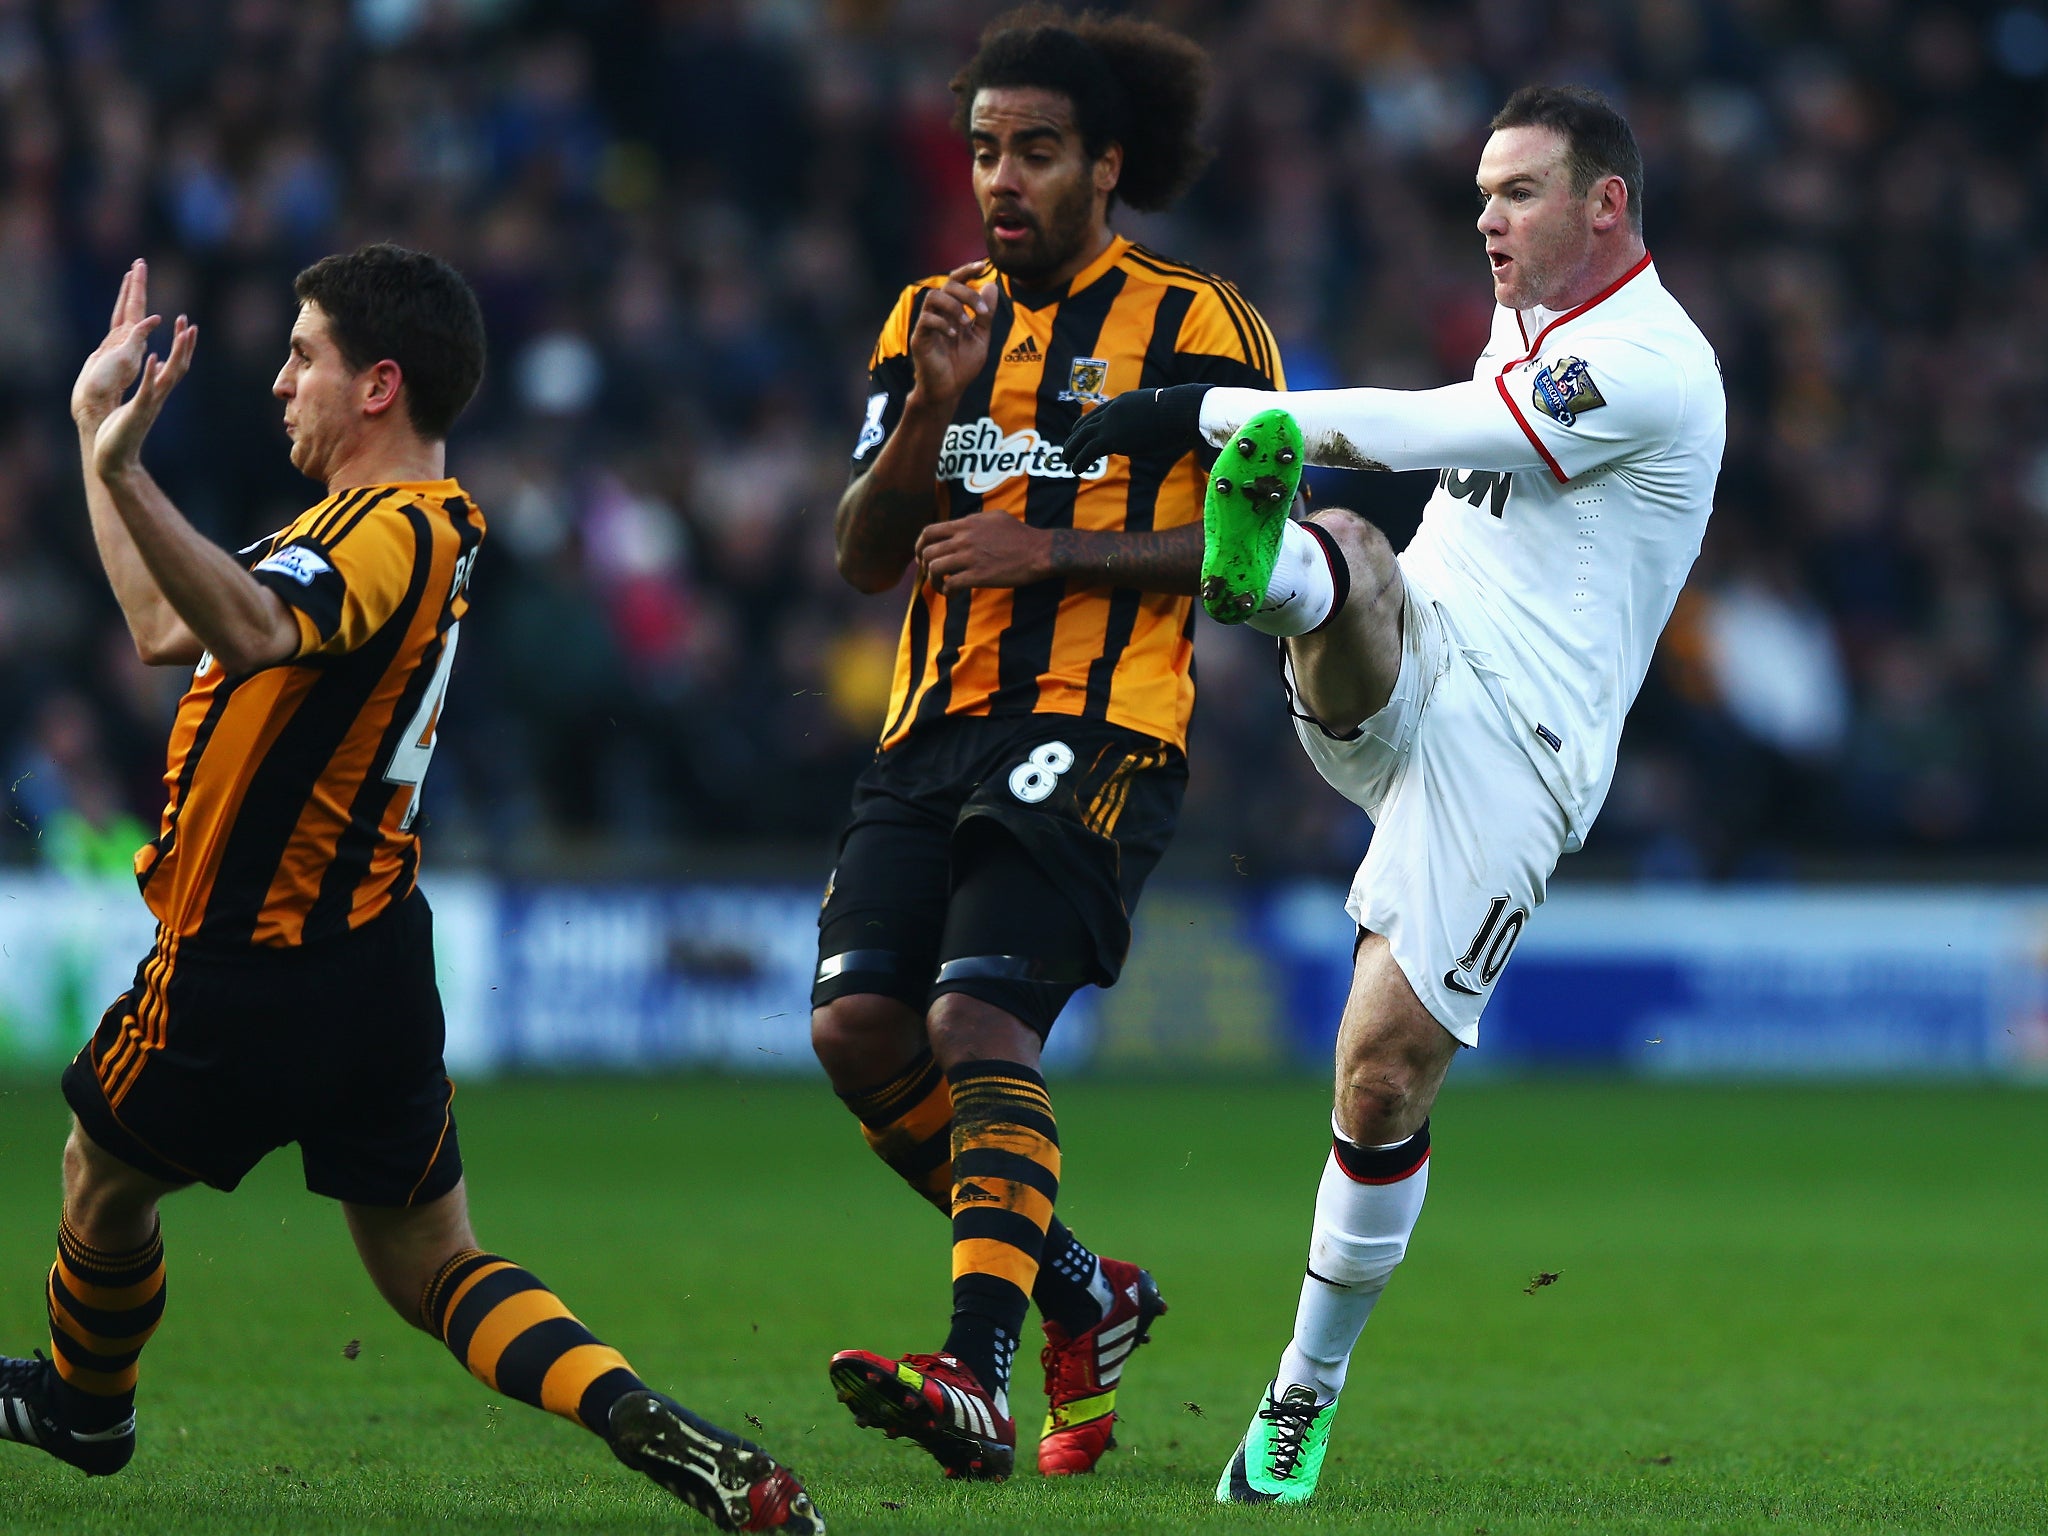 Wayne Rooney scores his 150th Premier League goal for Manchester United with brilliant volley at Hull.